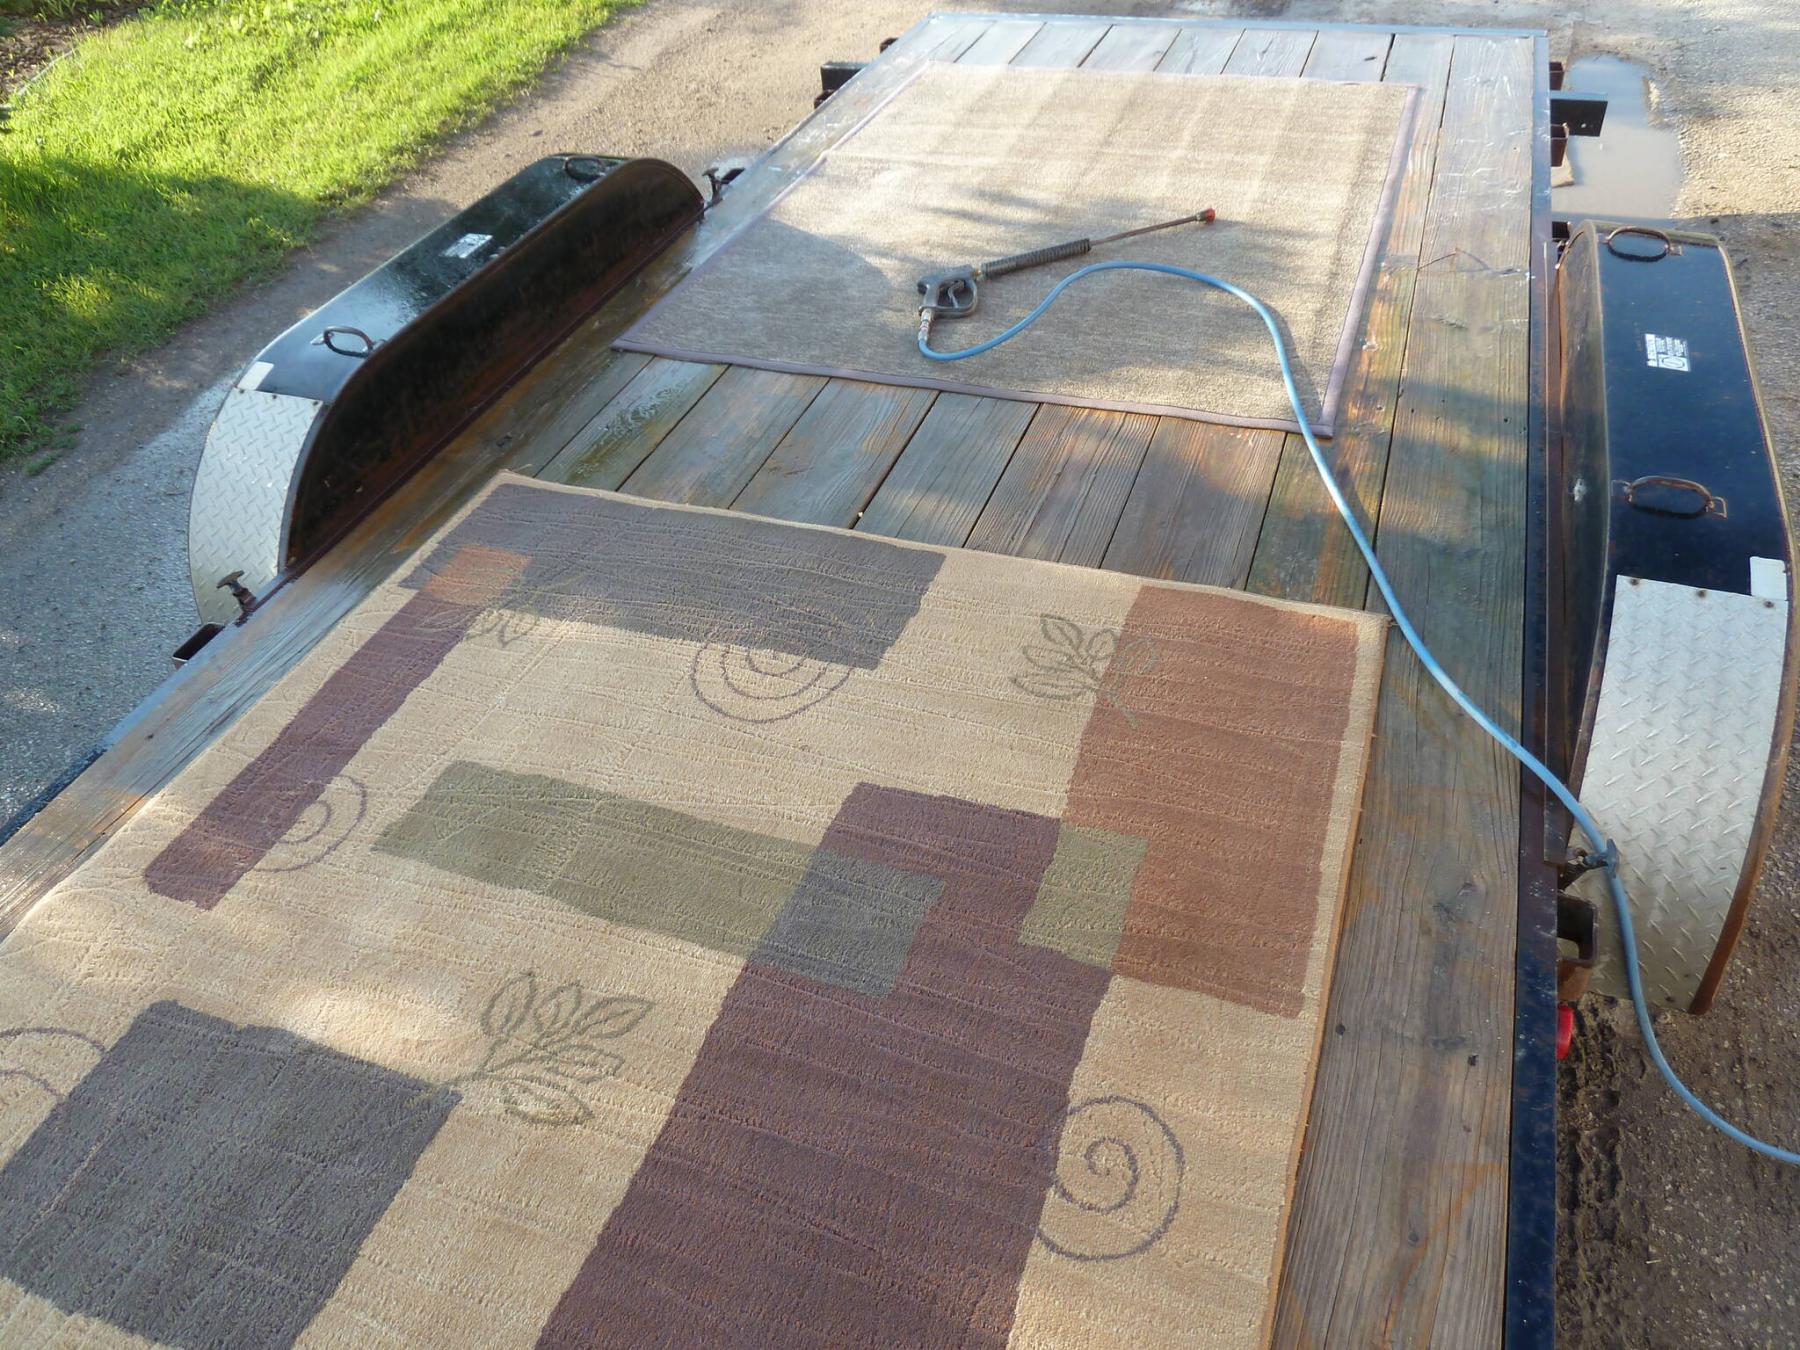 <p>Photos by Laurie Mustard / Winnipeg Free Press</p><p>A car trailer turned out to be the perfect platform to clean these area rugs with a pressure washer.</p>